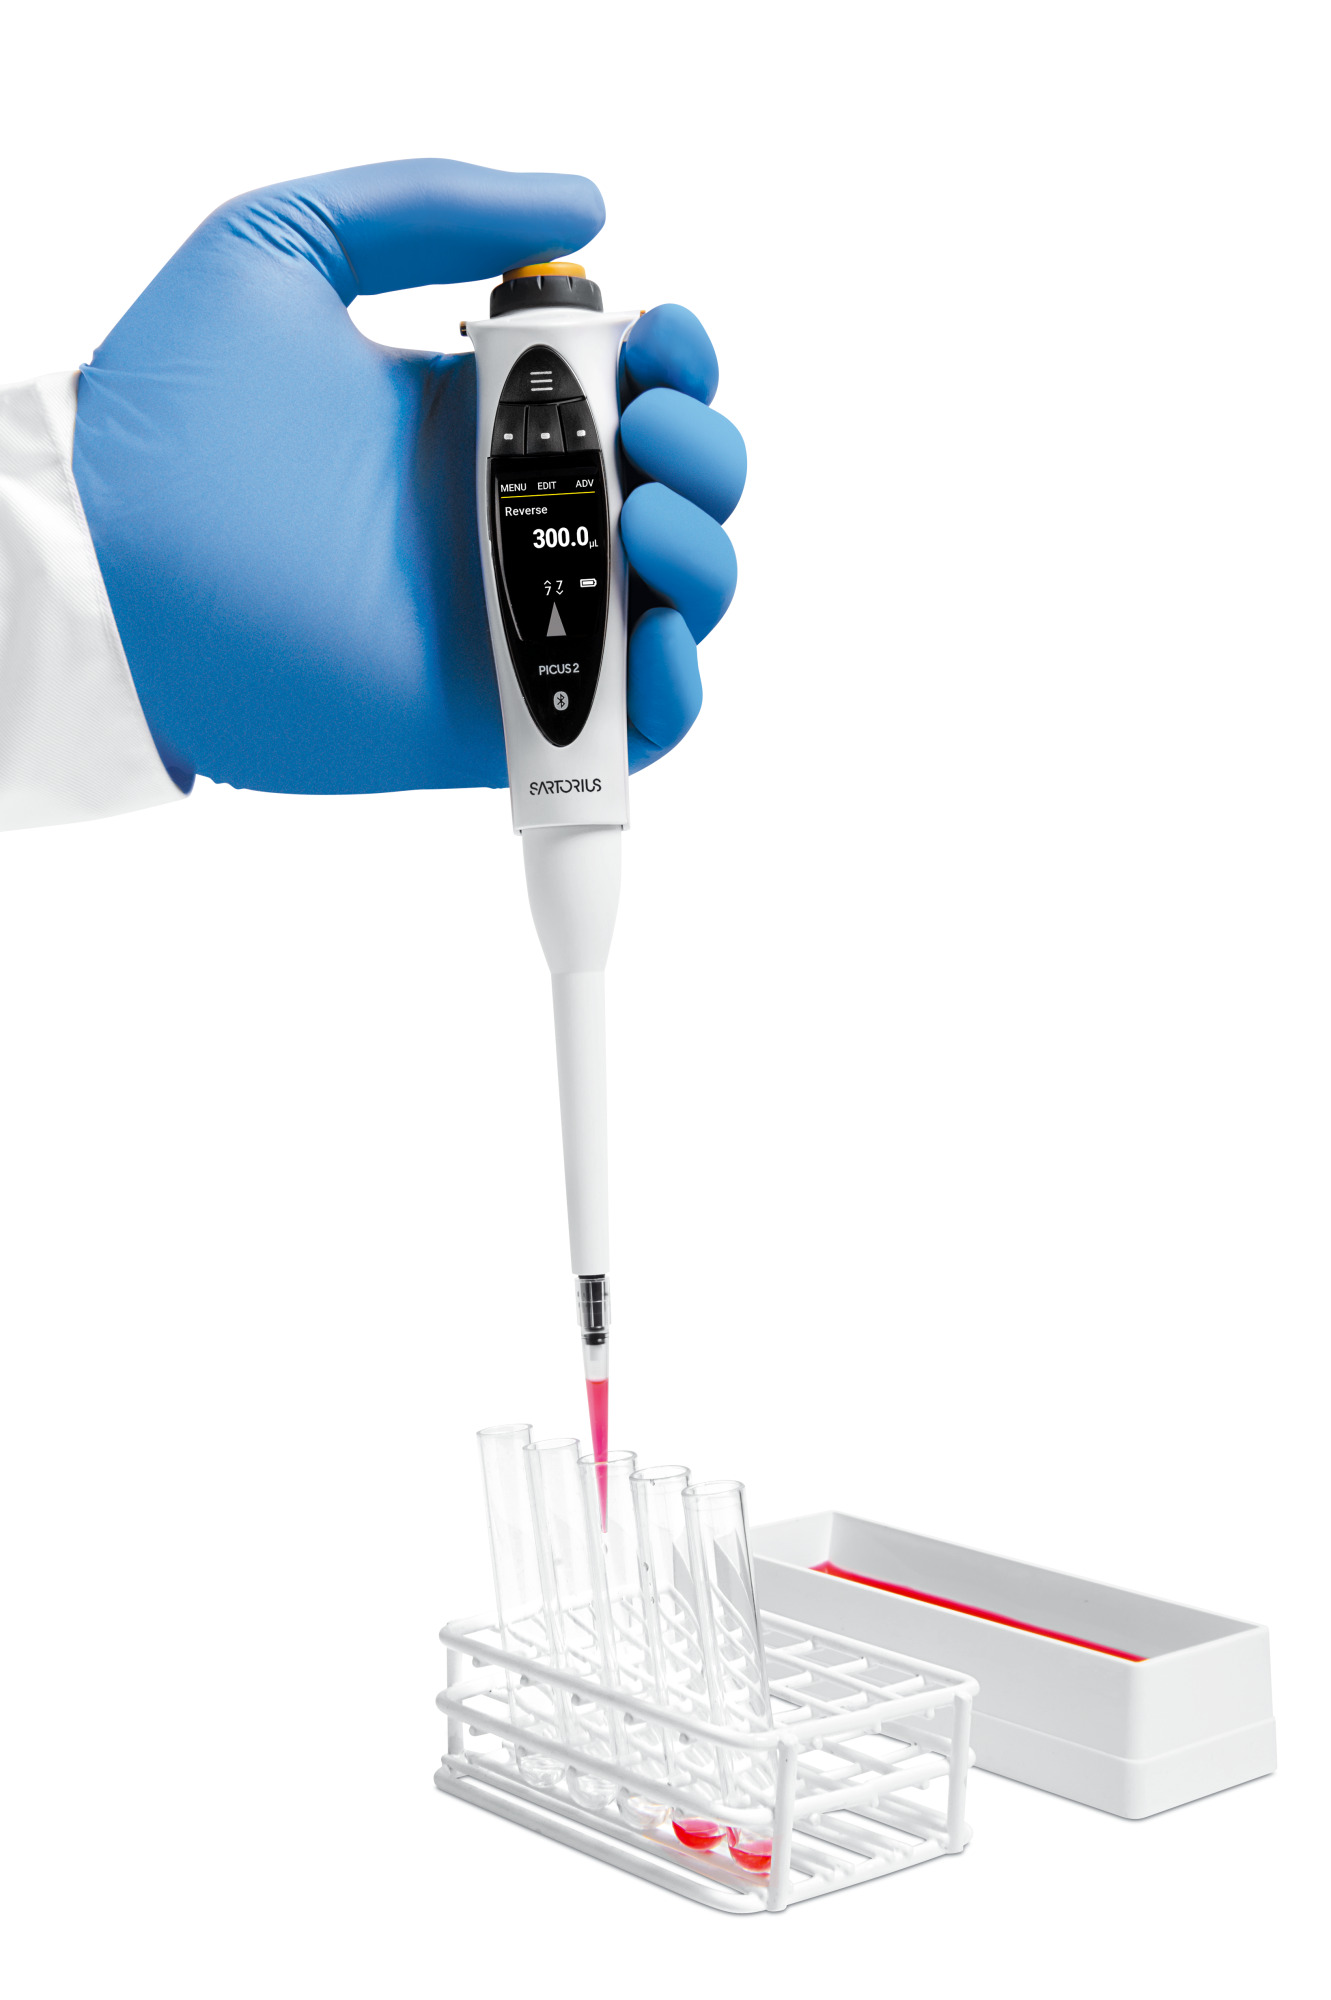 Pipetting with Picus 2 pipette